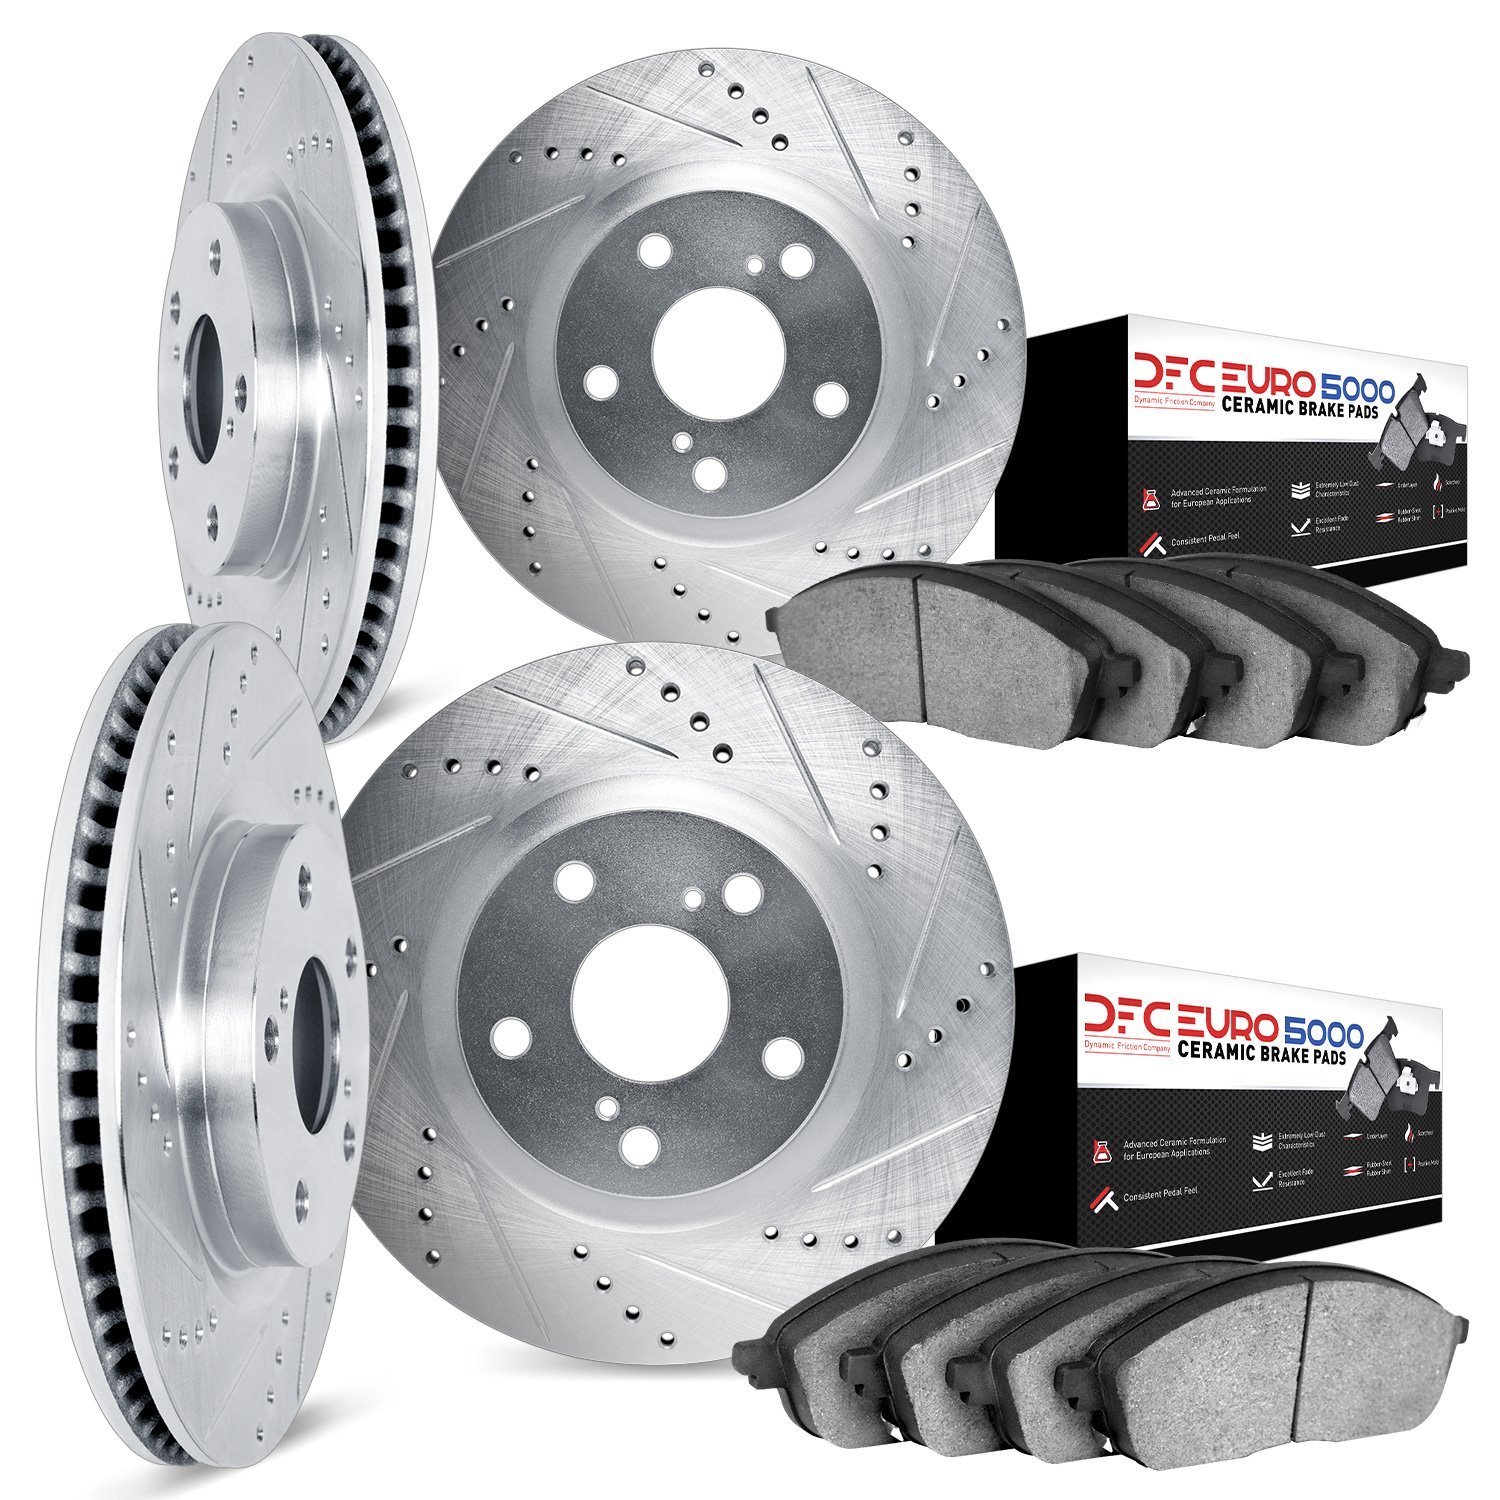 7604-02002 Drilled/Slotted Brake Rotors w/5000 Euro Ceramic Brake Pads Kit [Silver], 1975-1983 Porsche, Position: Front and Rear